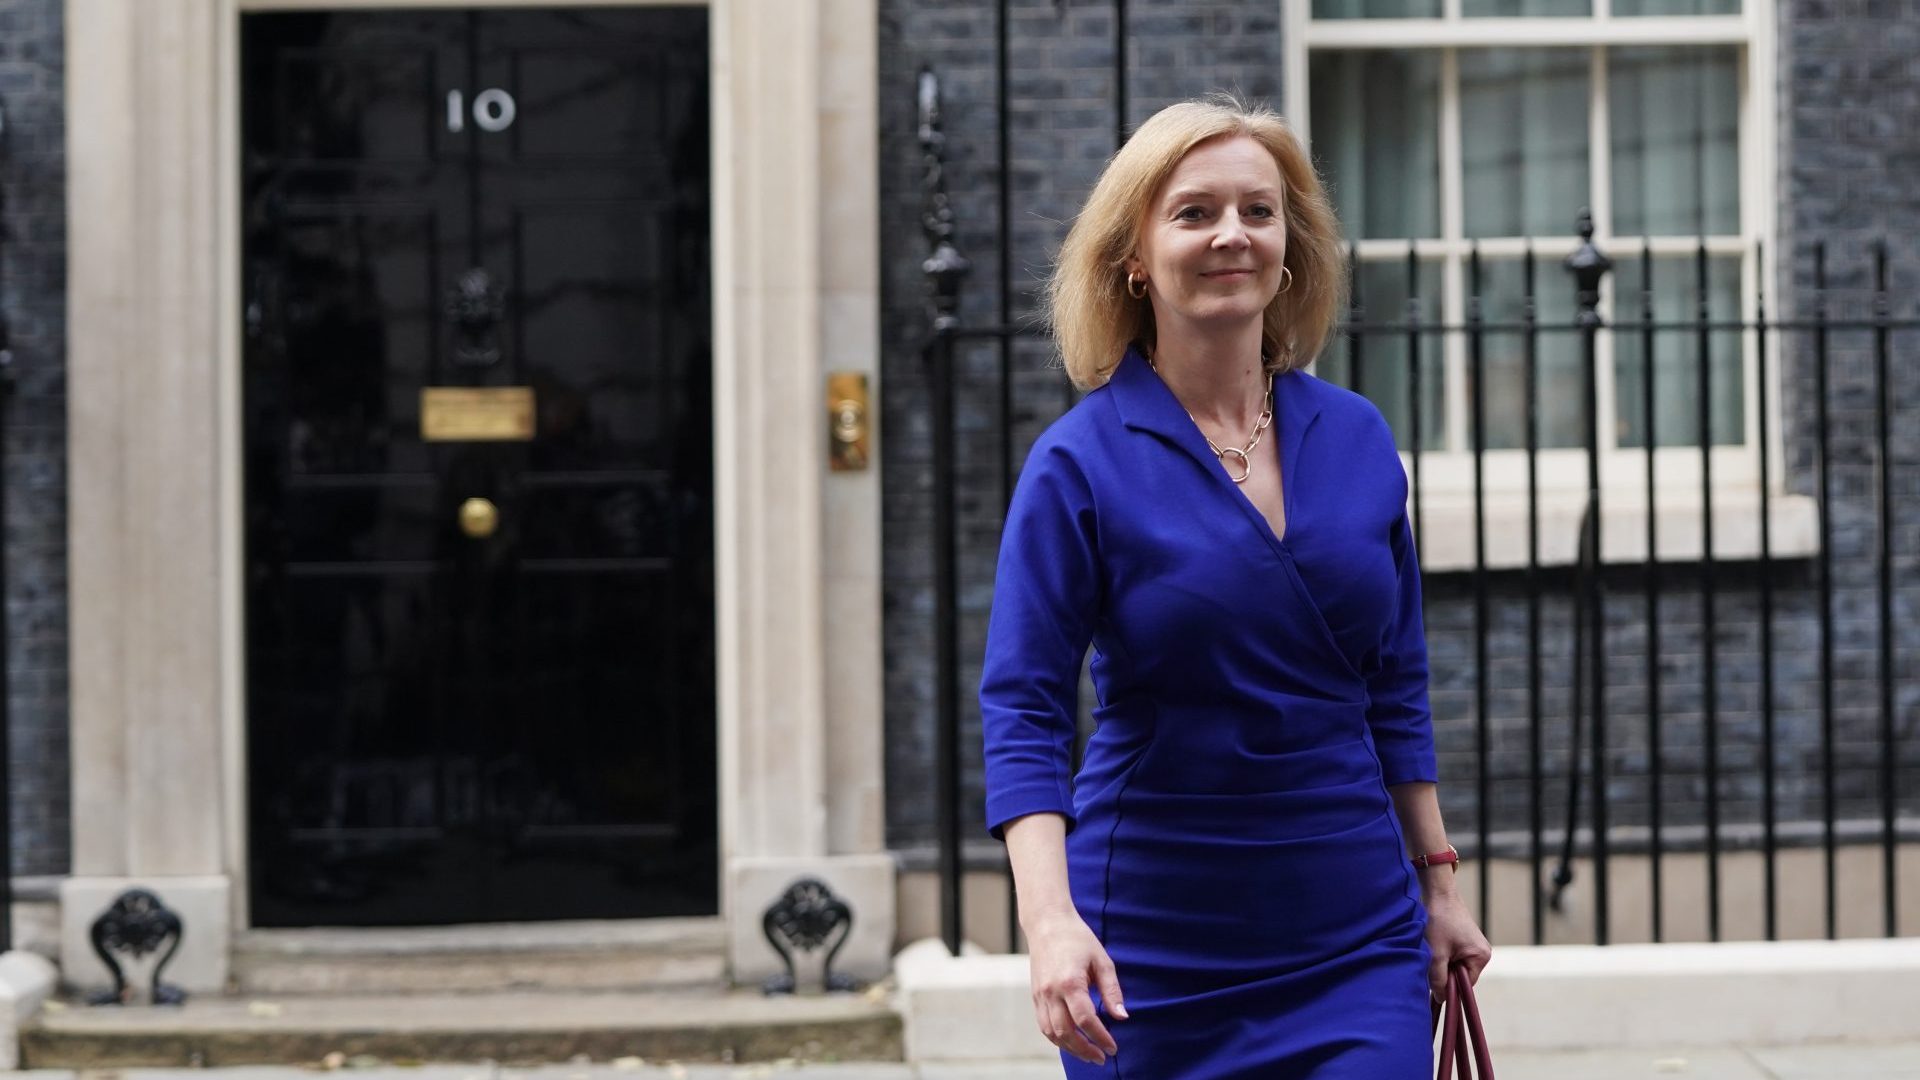 Liz Truss leaves Number 10 Downing Street after Boris Johnson reshuffles his Cabinet to appoint a "strong and united" team in September 2021. Photo:  Stefan Rousseau/PA Wire/PA Images.